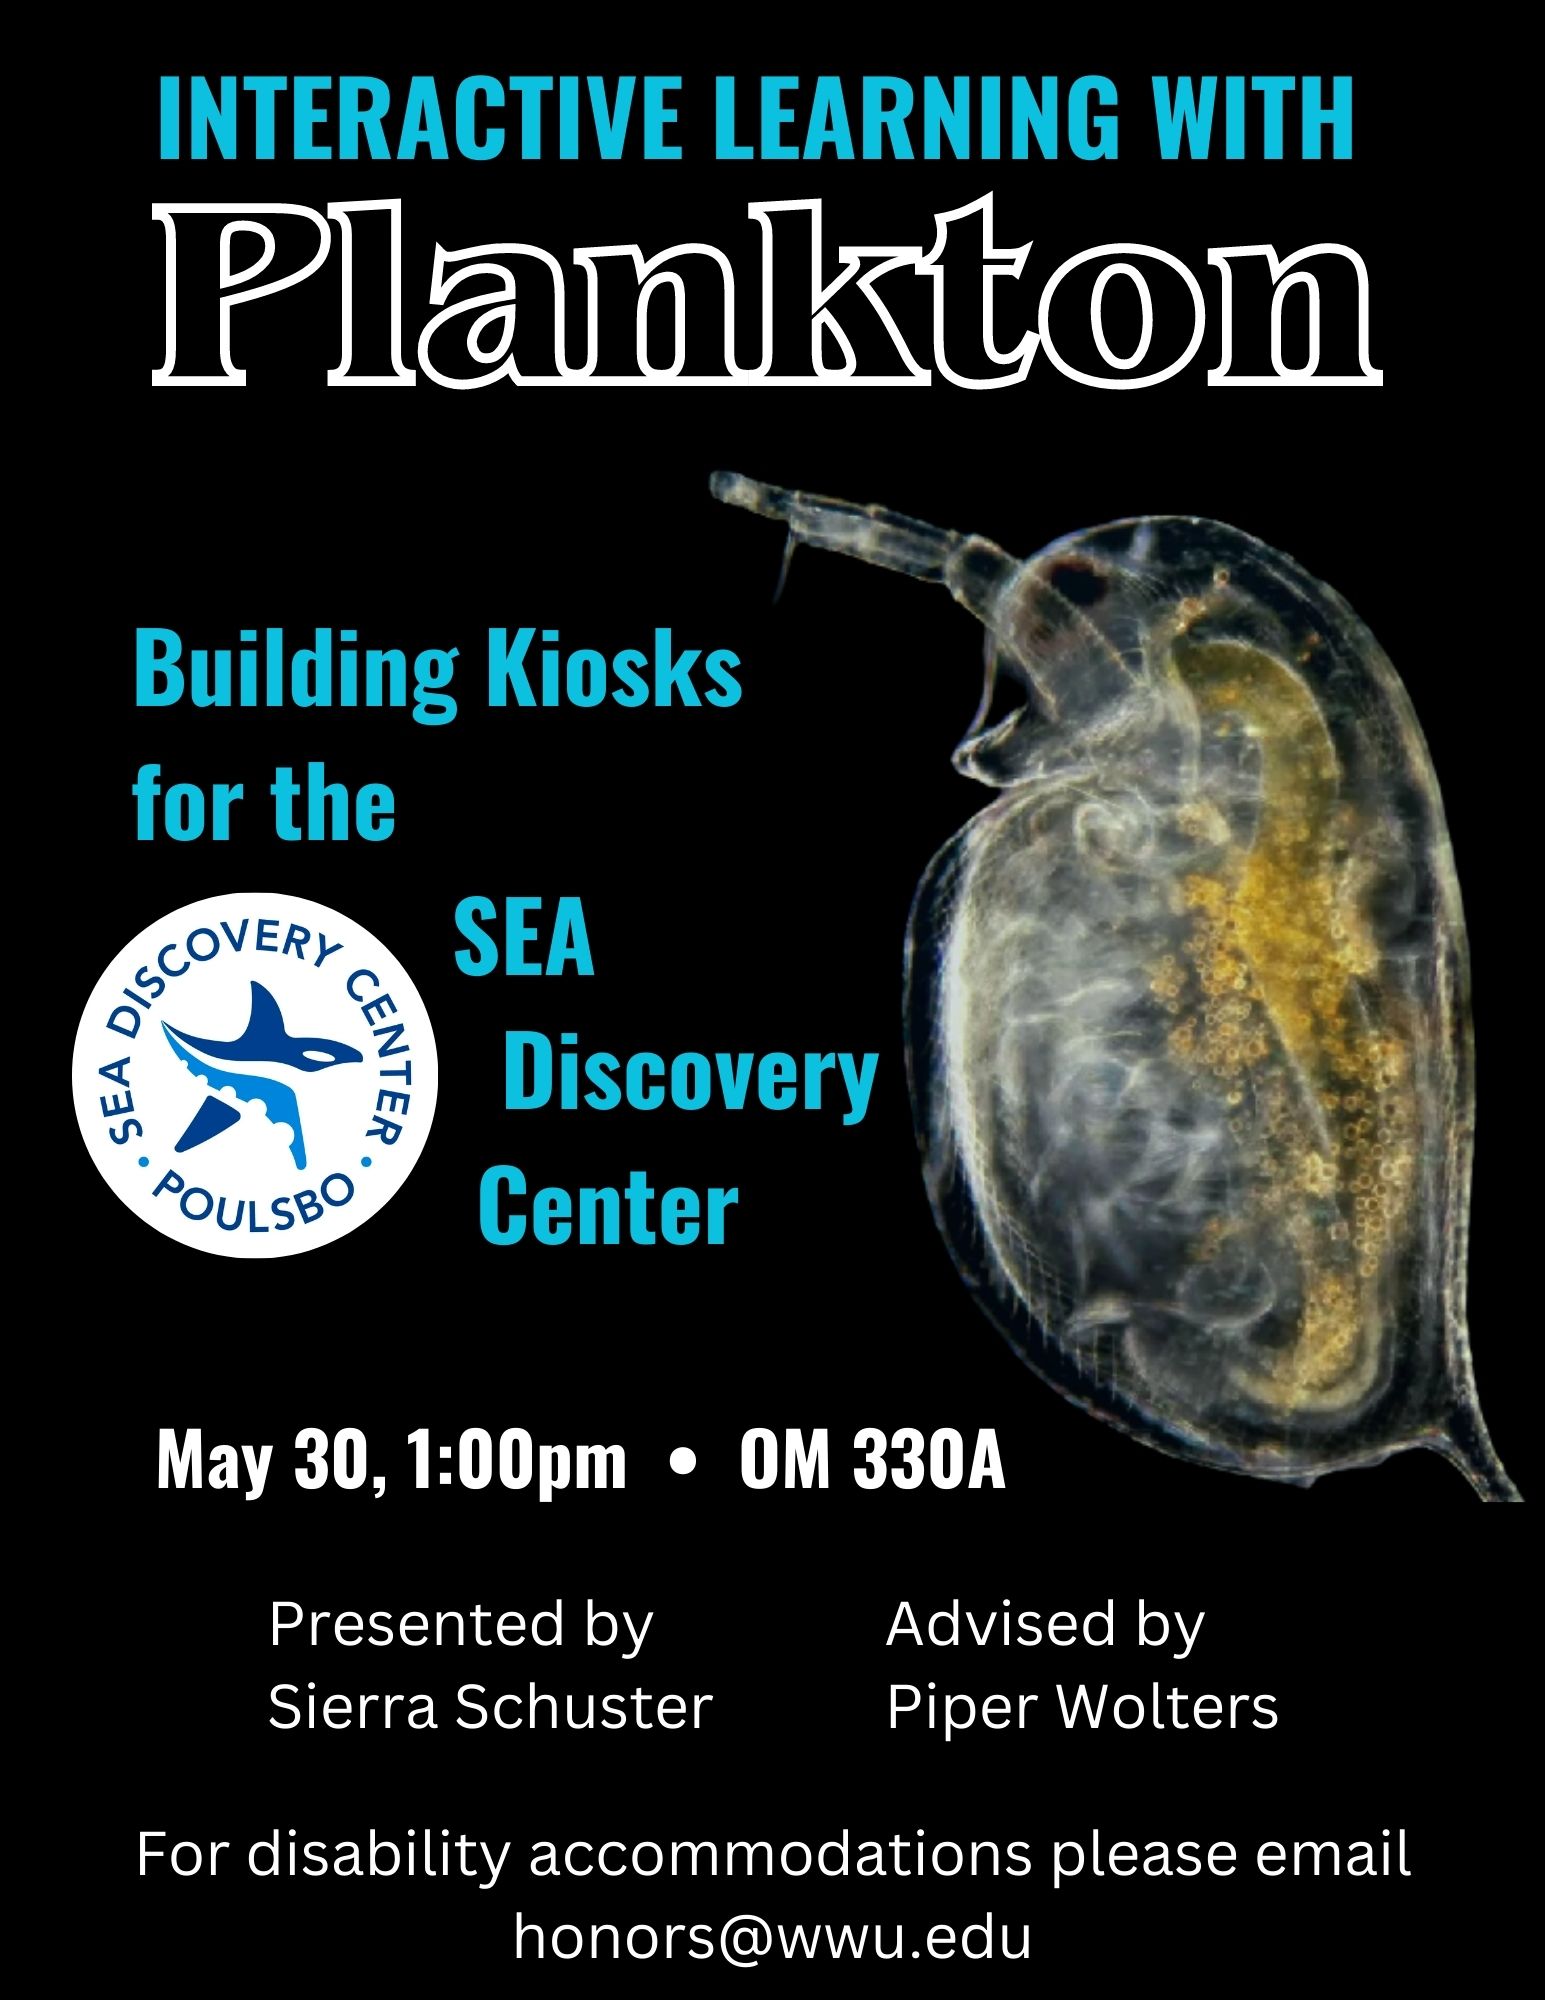 A poster with a black background with an image of a water flea on the right and a logo of the SEA Discovery Center-a white circle with a blue stylized starfish surrounded by the Center's name on the top and "Paulsbo" at the bottom. Text reads: "Interactive Learning with Plankton. Building Kiosks for the SEA Discovery Center. May 30, 1:00pm, OM 330A. Presented by Sierra Schuster. Advised by Piper Wolters. For disability accommodations please email honors@wwu.edu.”